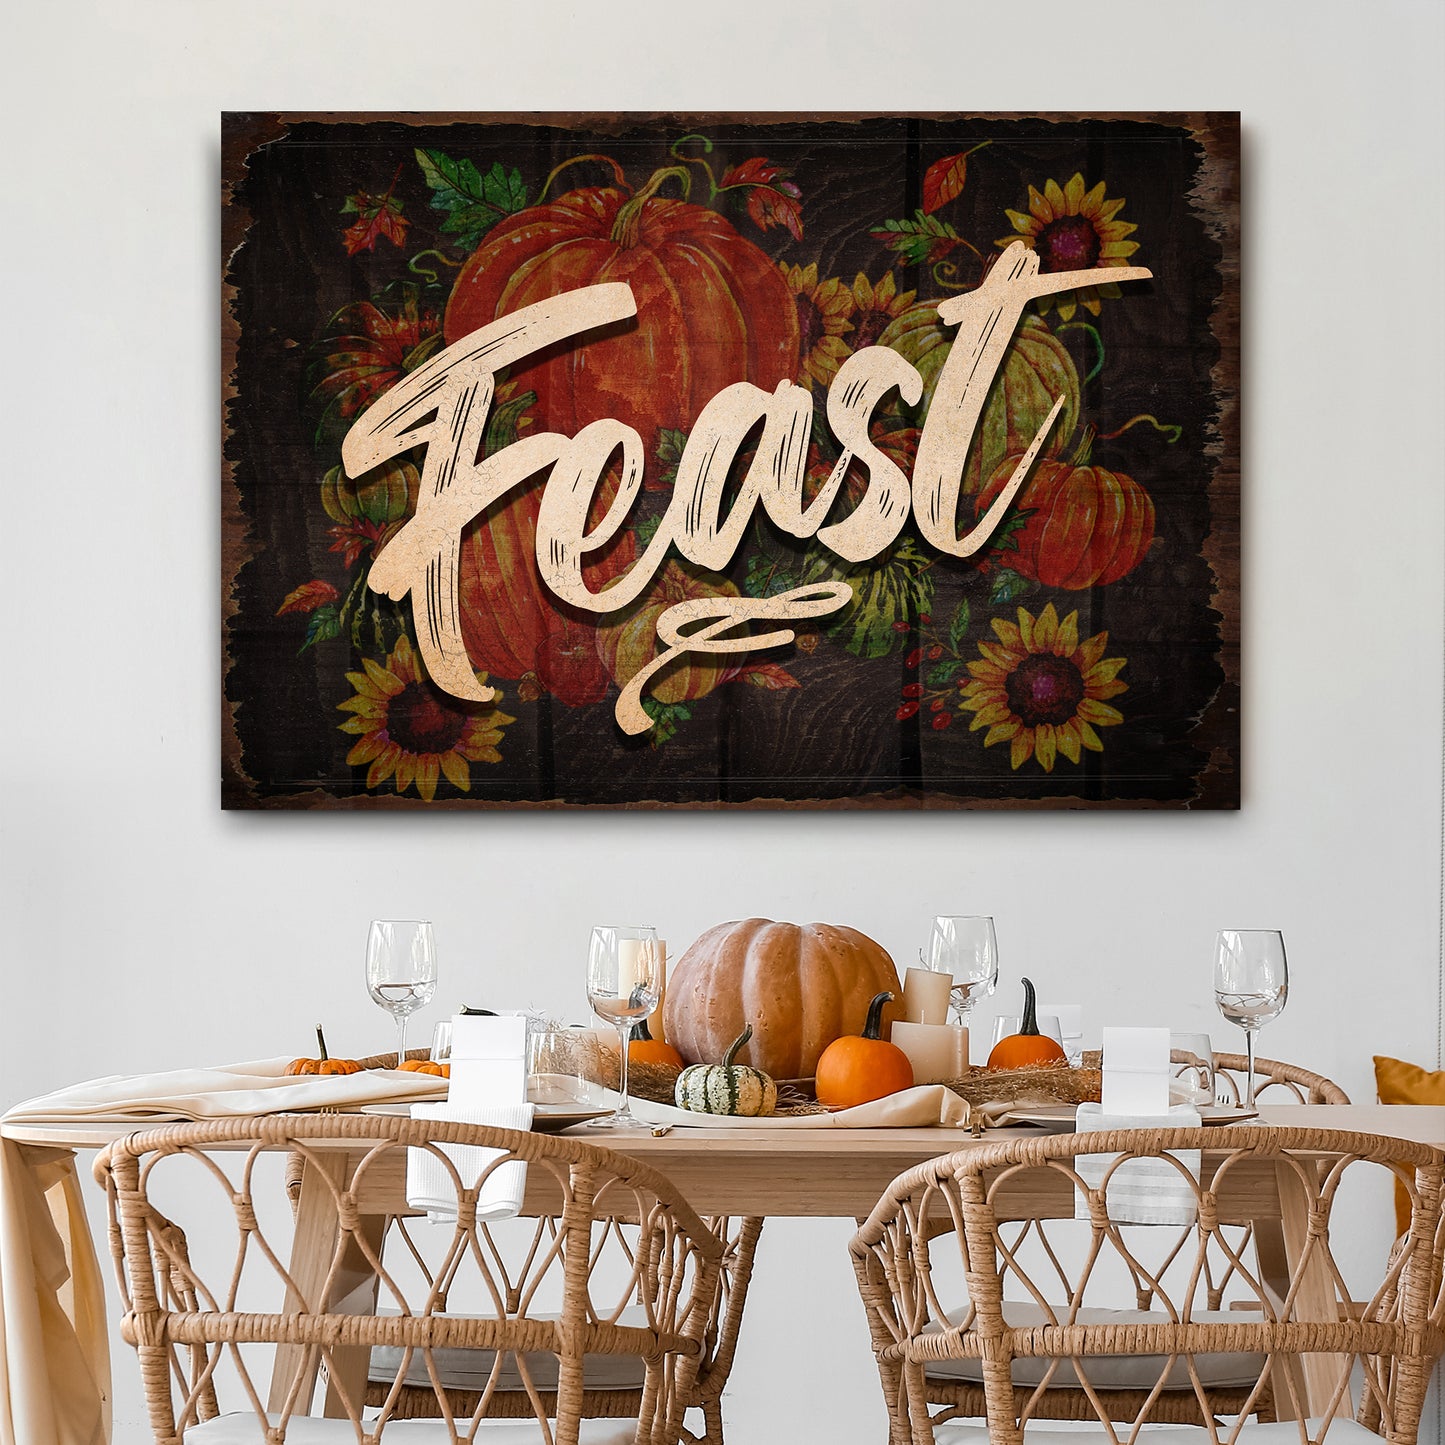 Feast Sign - Image by Tailored Canvases